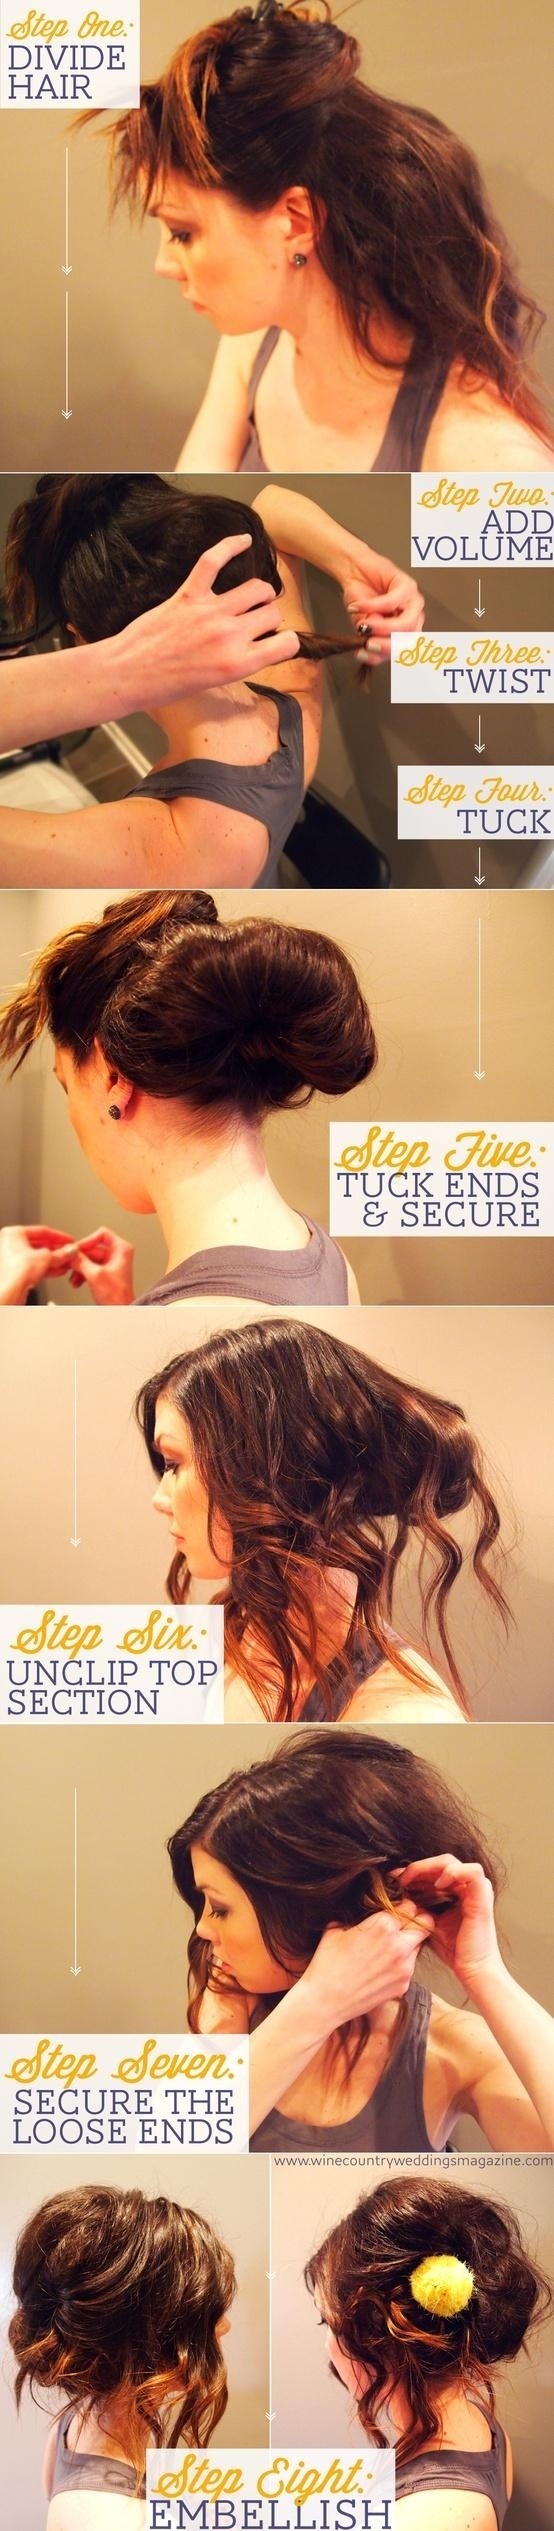 Casual Holiday Hairstyles: Messy Updo Tutorial